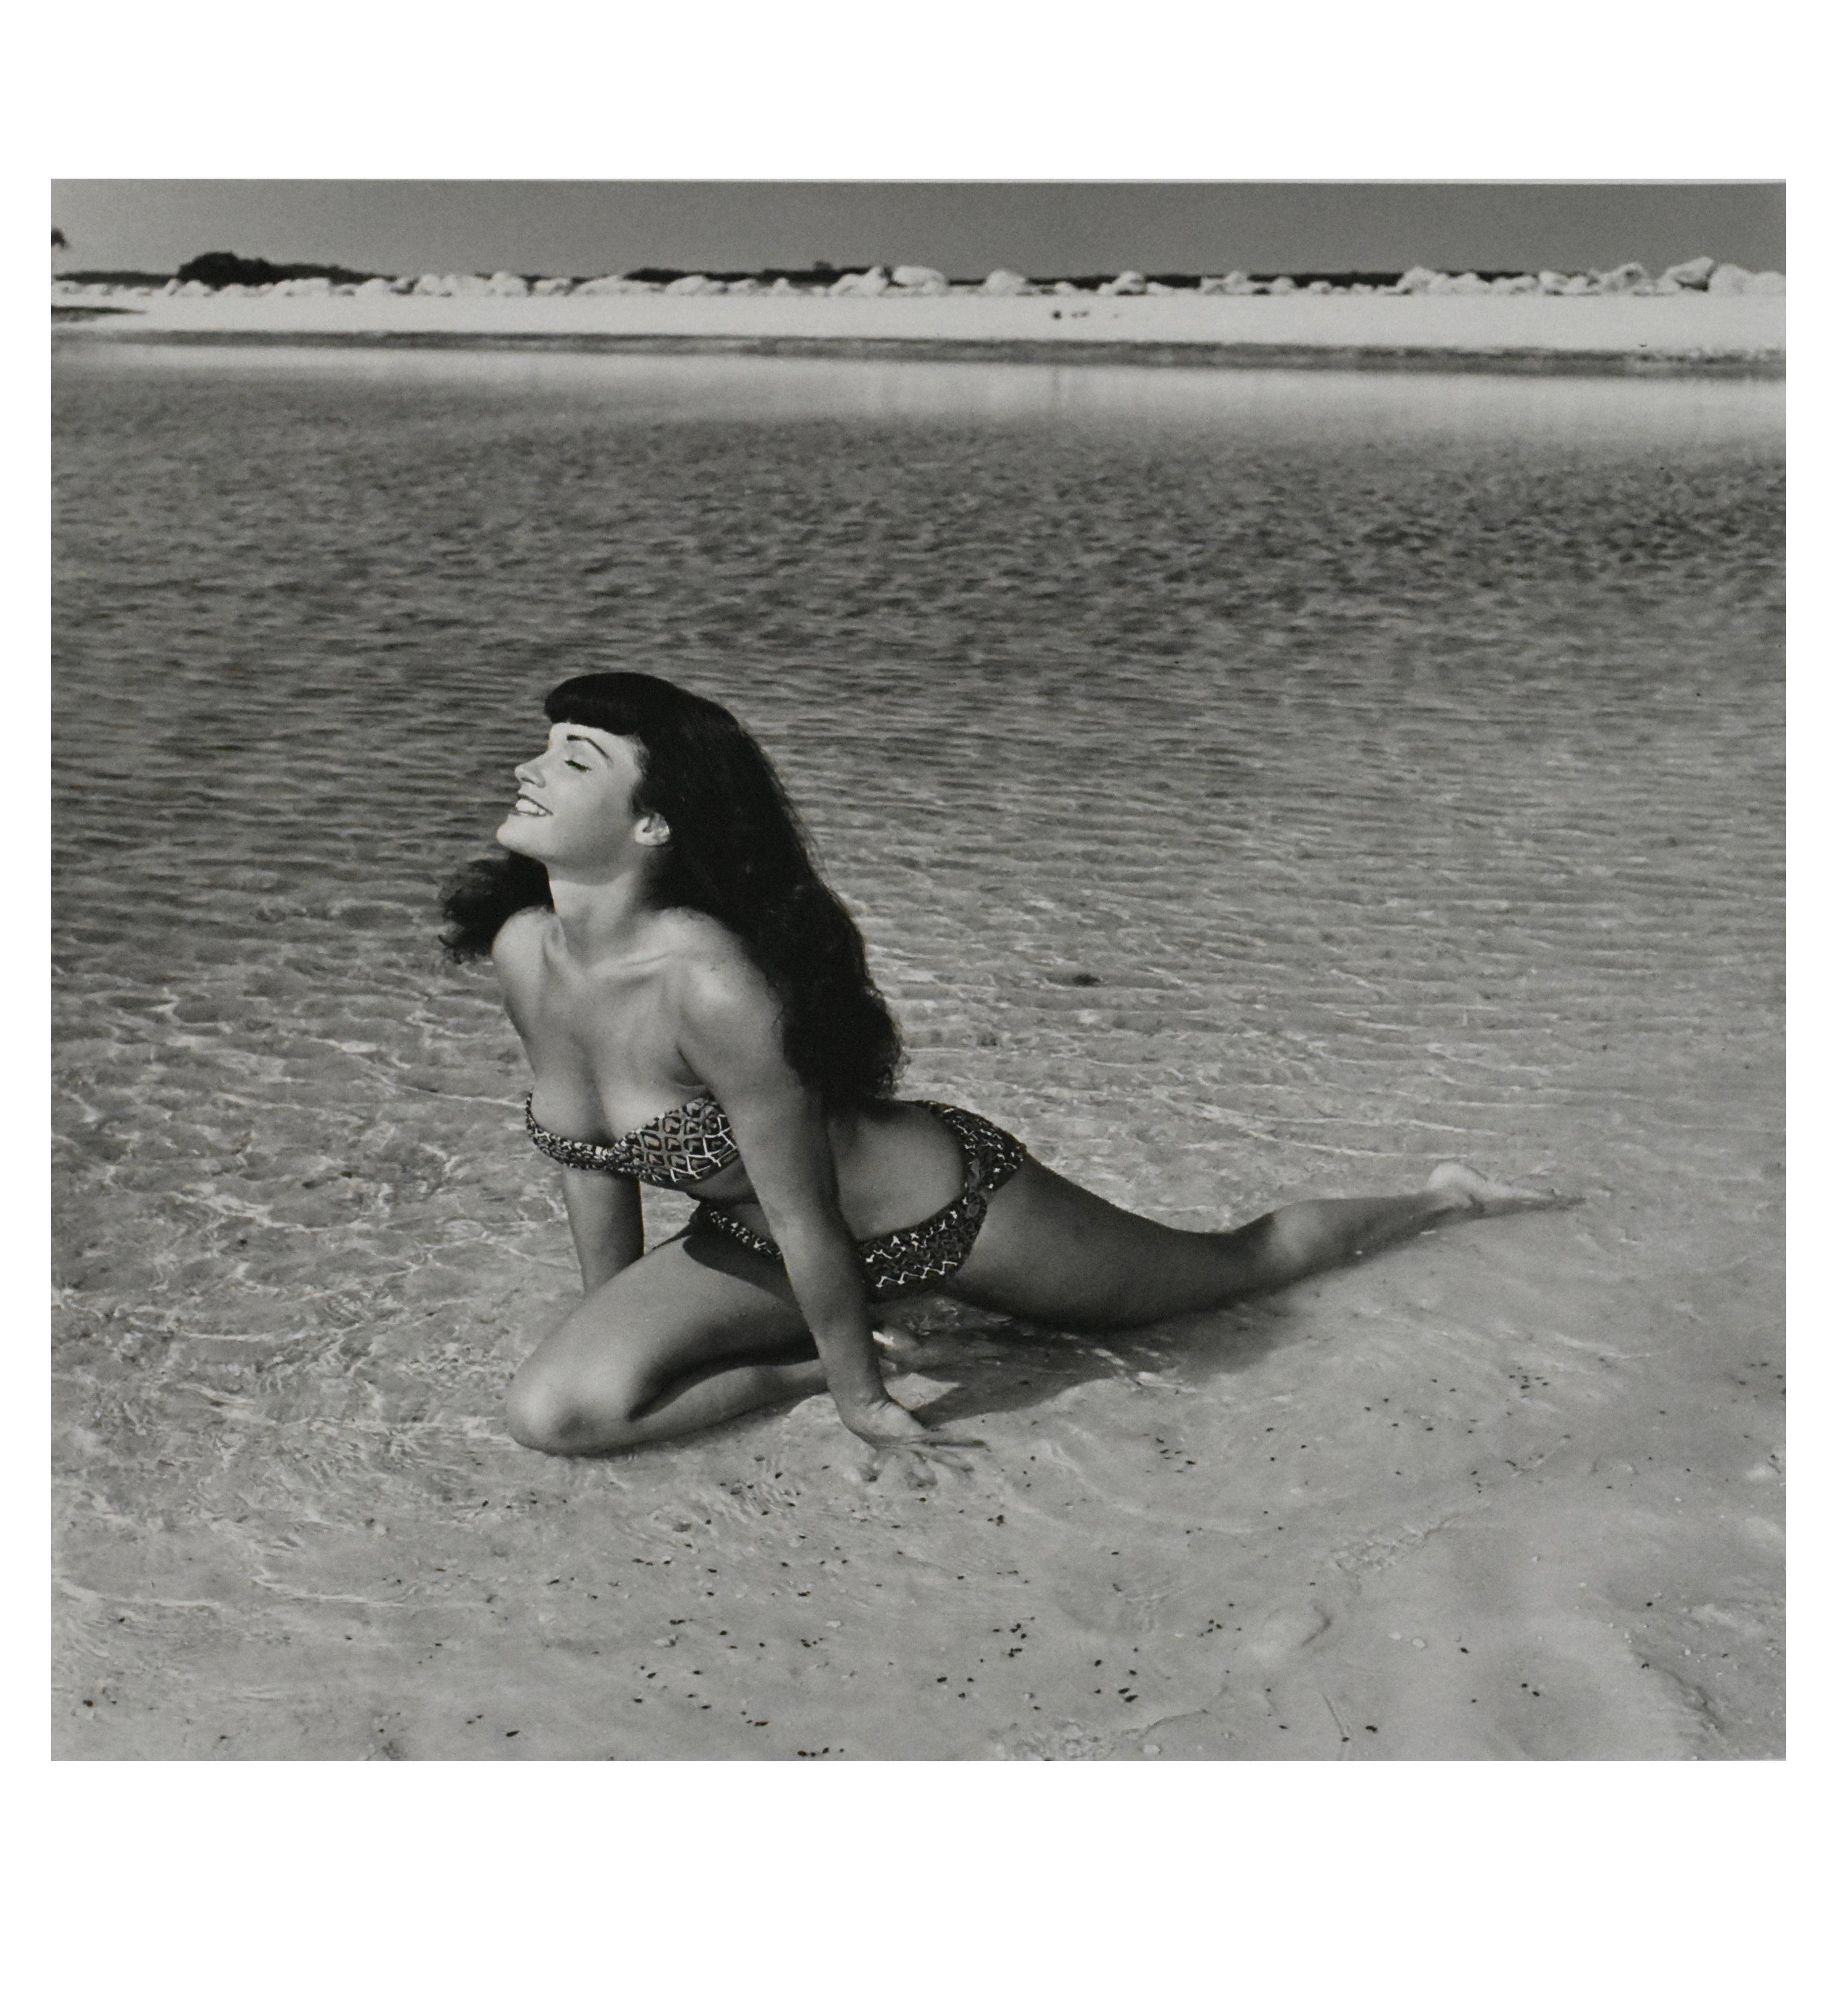 Bettie Page 'Kneeling in Surf', Key Biscayne, Florida, 1954 by Bunny Yeager
Photographed in 1954
Printed in 2013
Gelatin Silver Print
Image size: 19 in. H x 18.75 in. W
Sheet size: 24 in. H x 20 in. W
Frame size: 26.5 in. H x 31 in. W
Artist